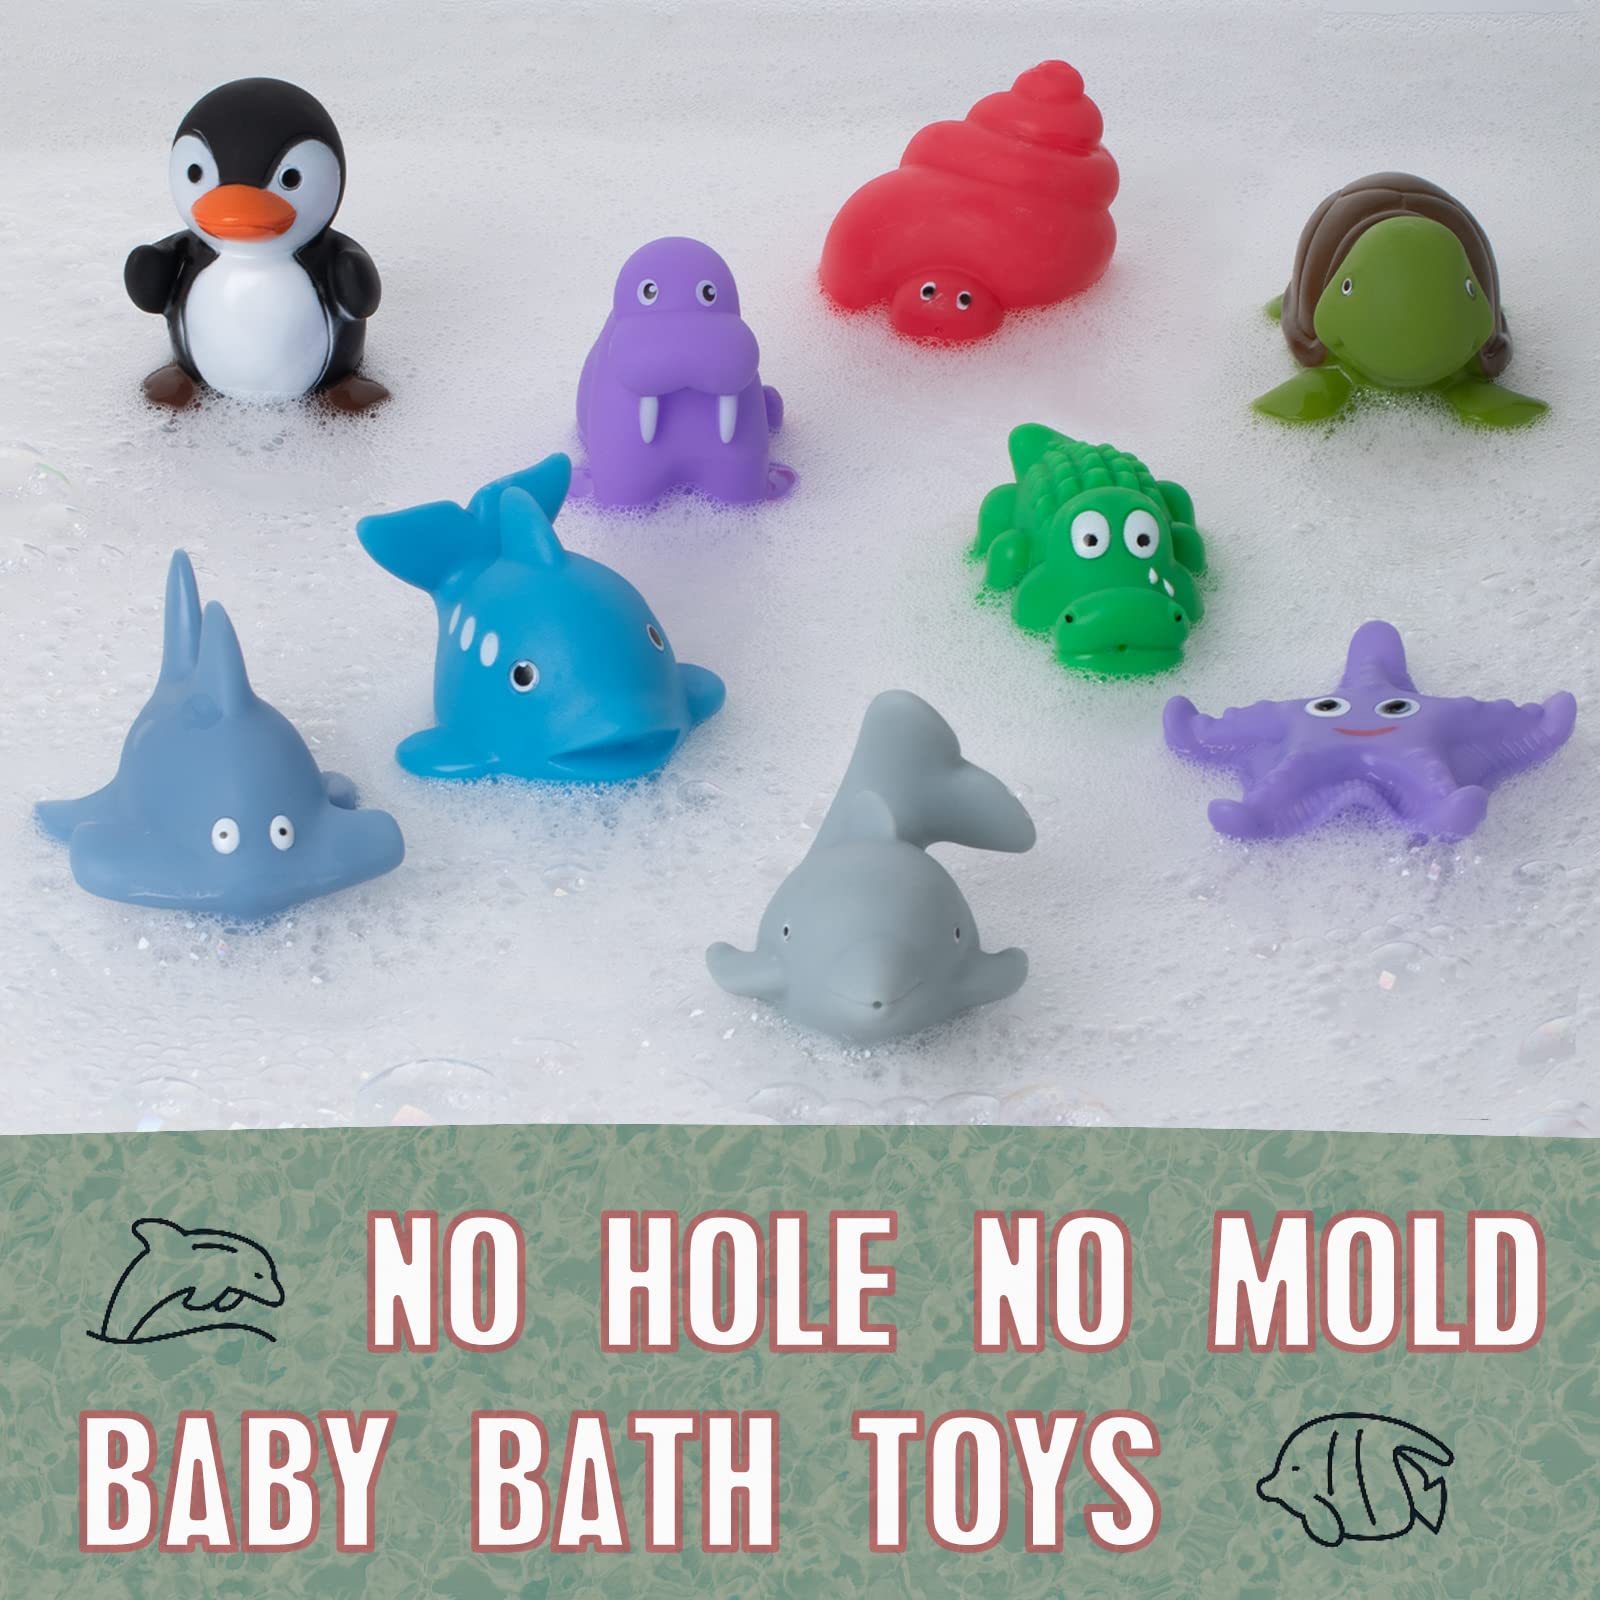 Mold Free Ocean Bath Toys for Toddlers/ Infants 6 - 12- 18 Months, No Hole No Mold Bathtub Toys, 1 2 3 4 Years Old Kids (9 Pcs Ocean Animals with Mesh Bag)